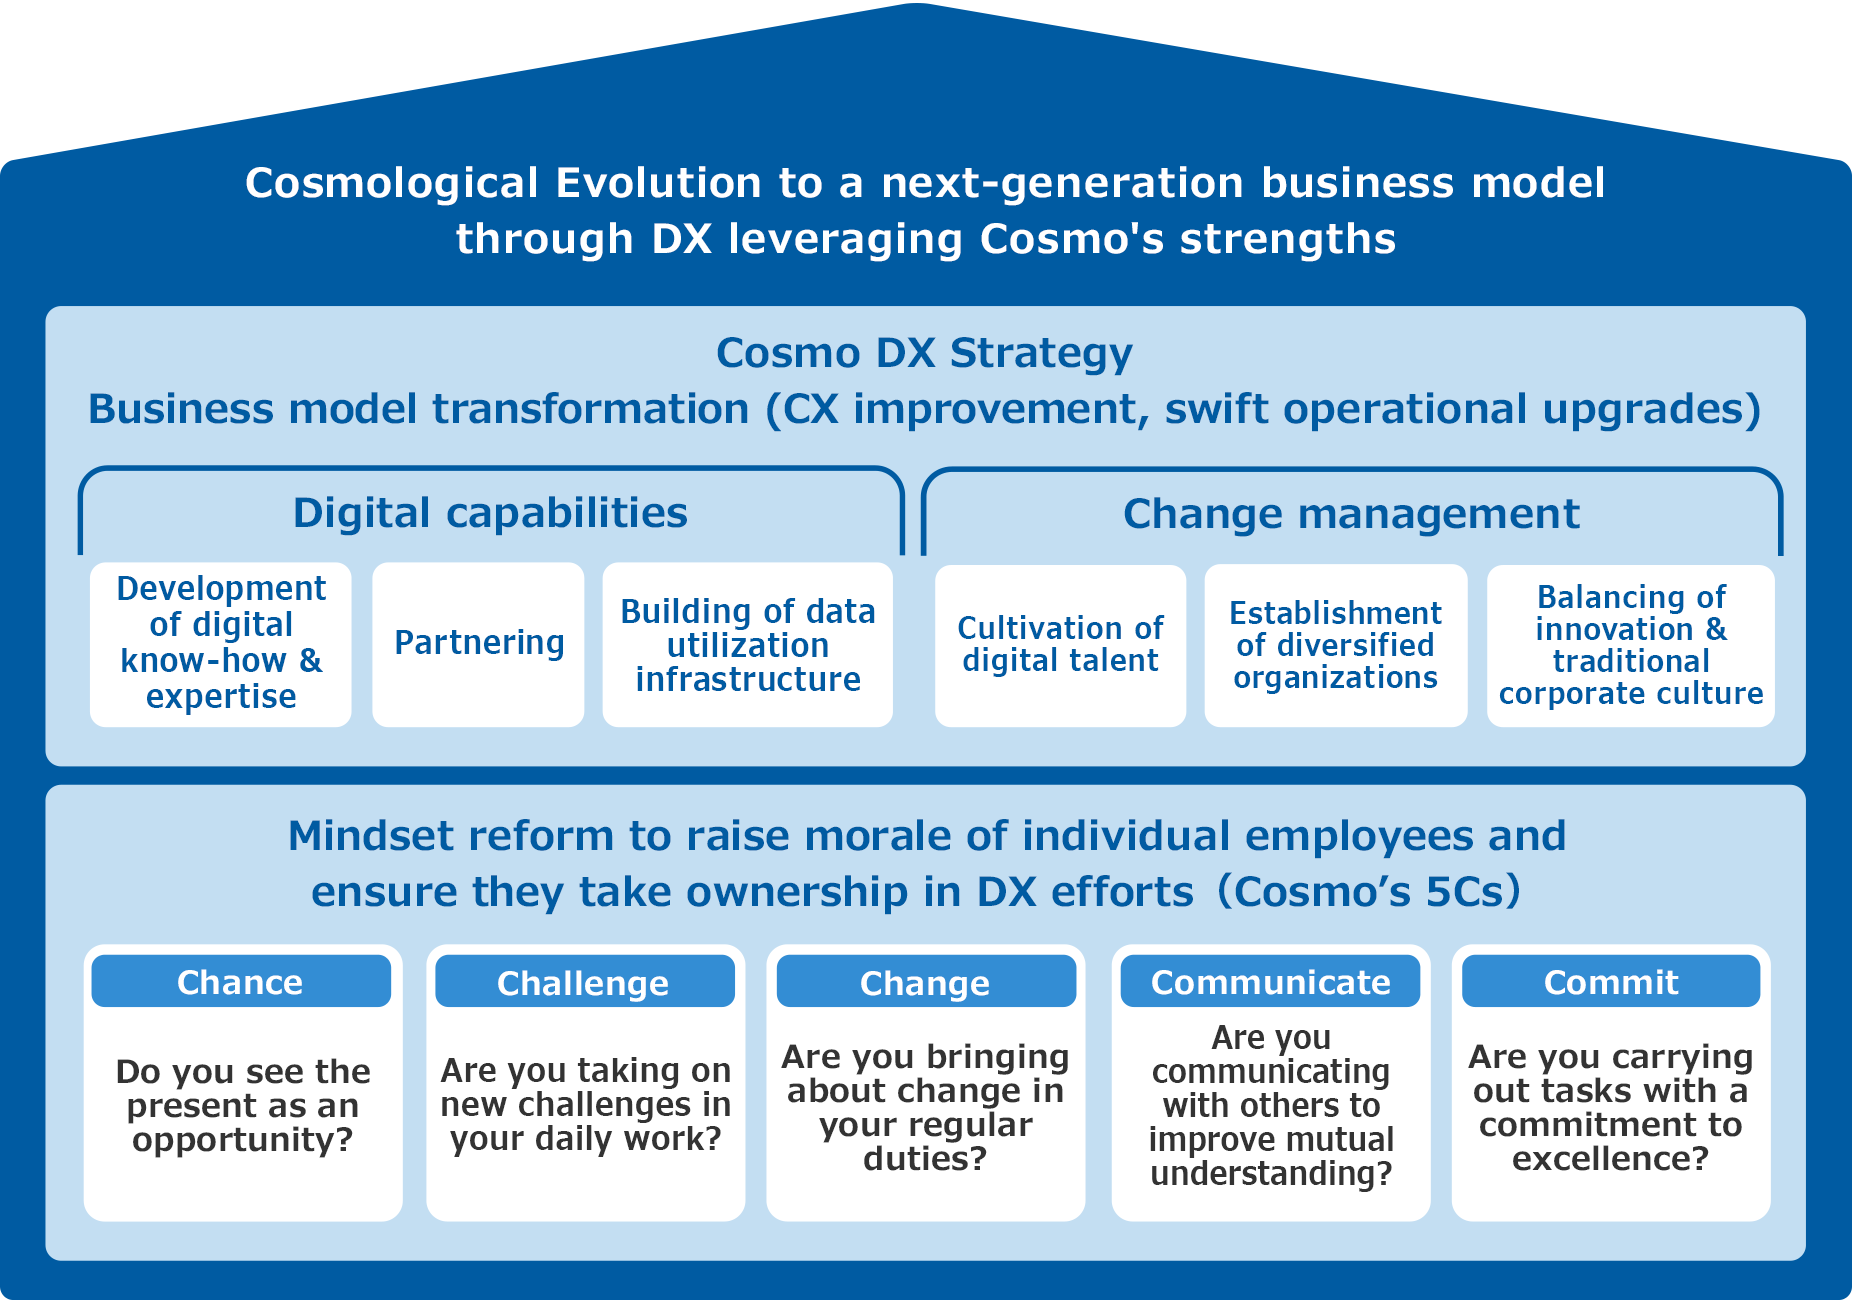 Cosmological Evolution to a next-generation business model through DX leveraging Cosmo's strengths